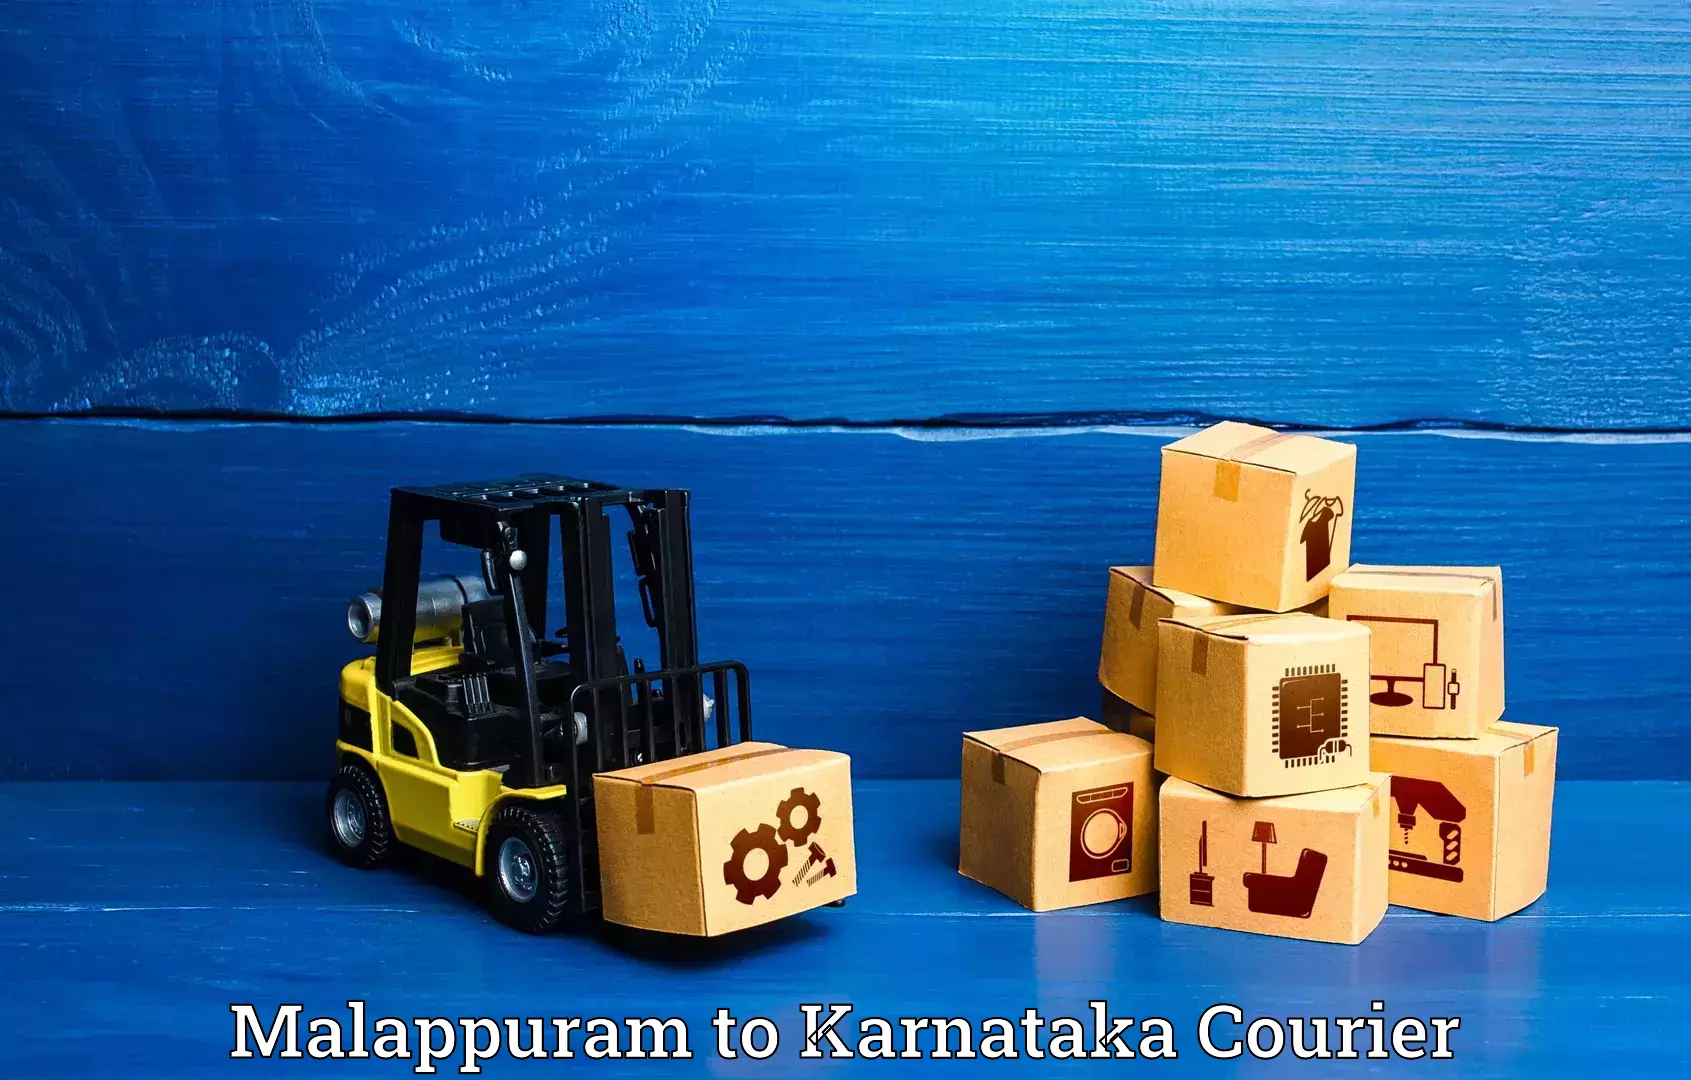 Luggage shipment specialists Malappuram to Bantwal